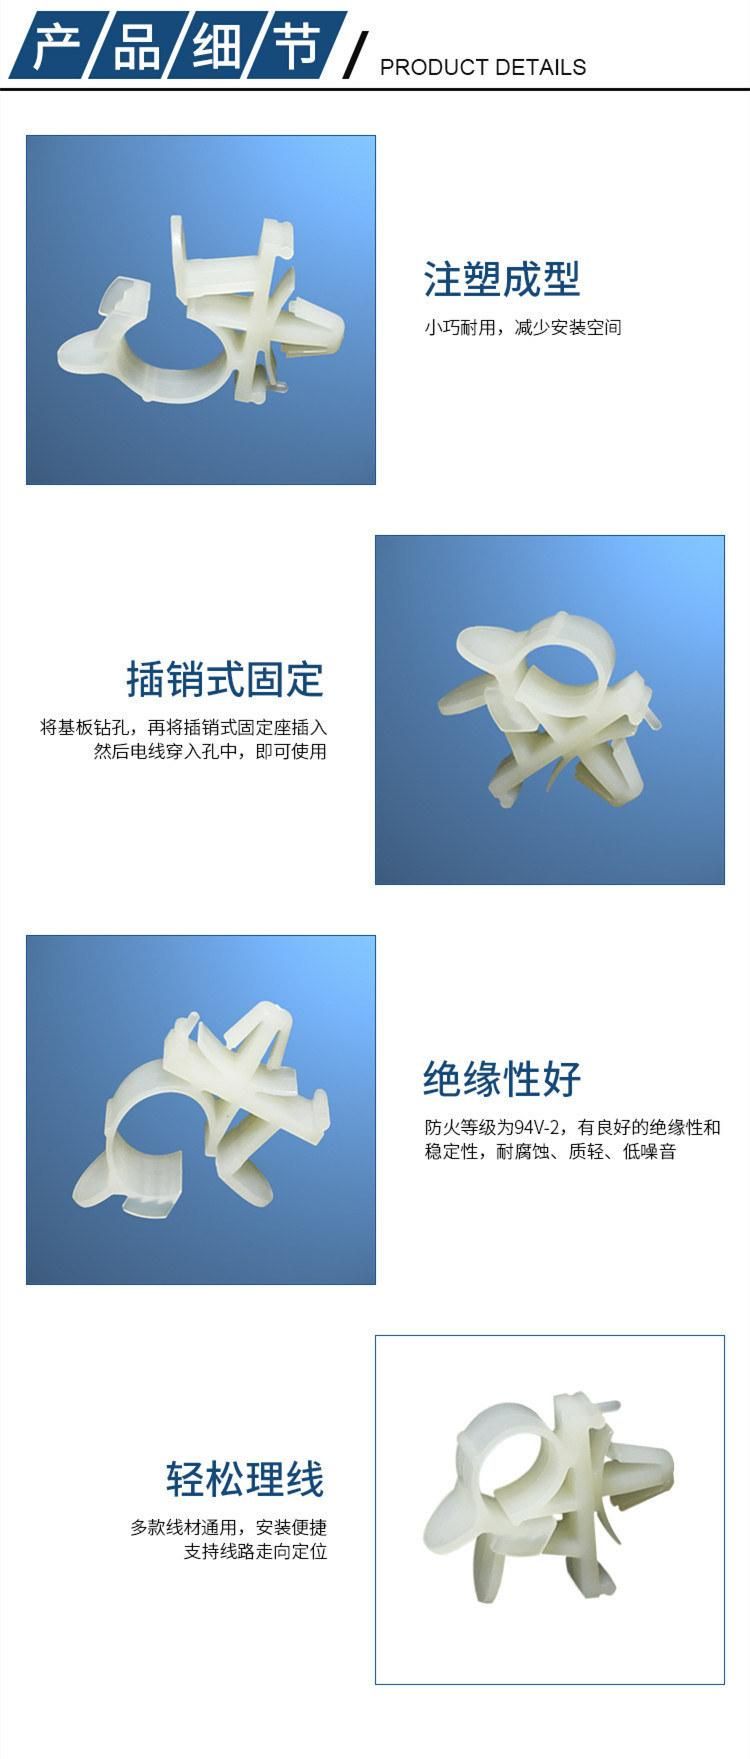 Plastic Cable Fasten Saddle for Computer Case Cable Fastening, Heyingcn Factory Supply Insulation Nylon Cable Clip